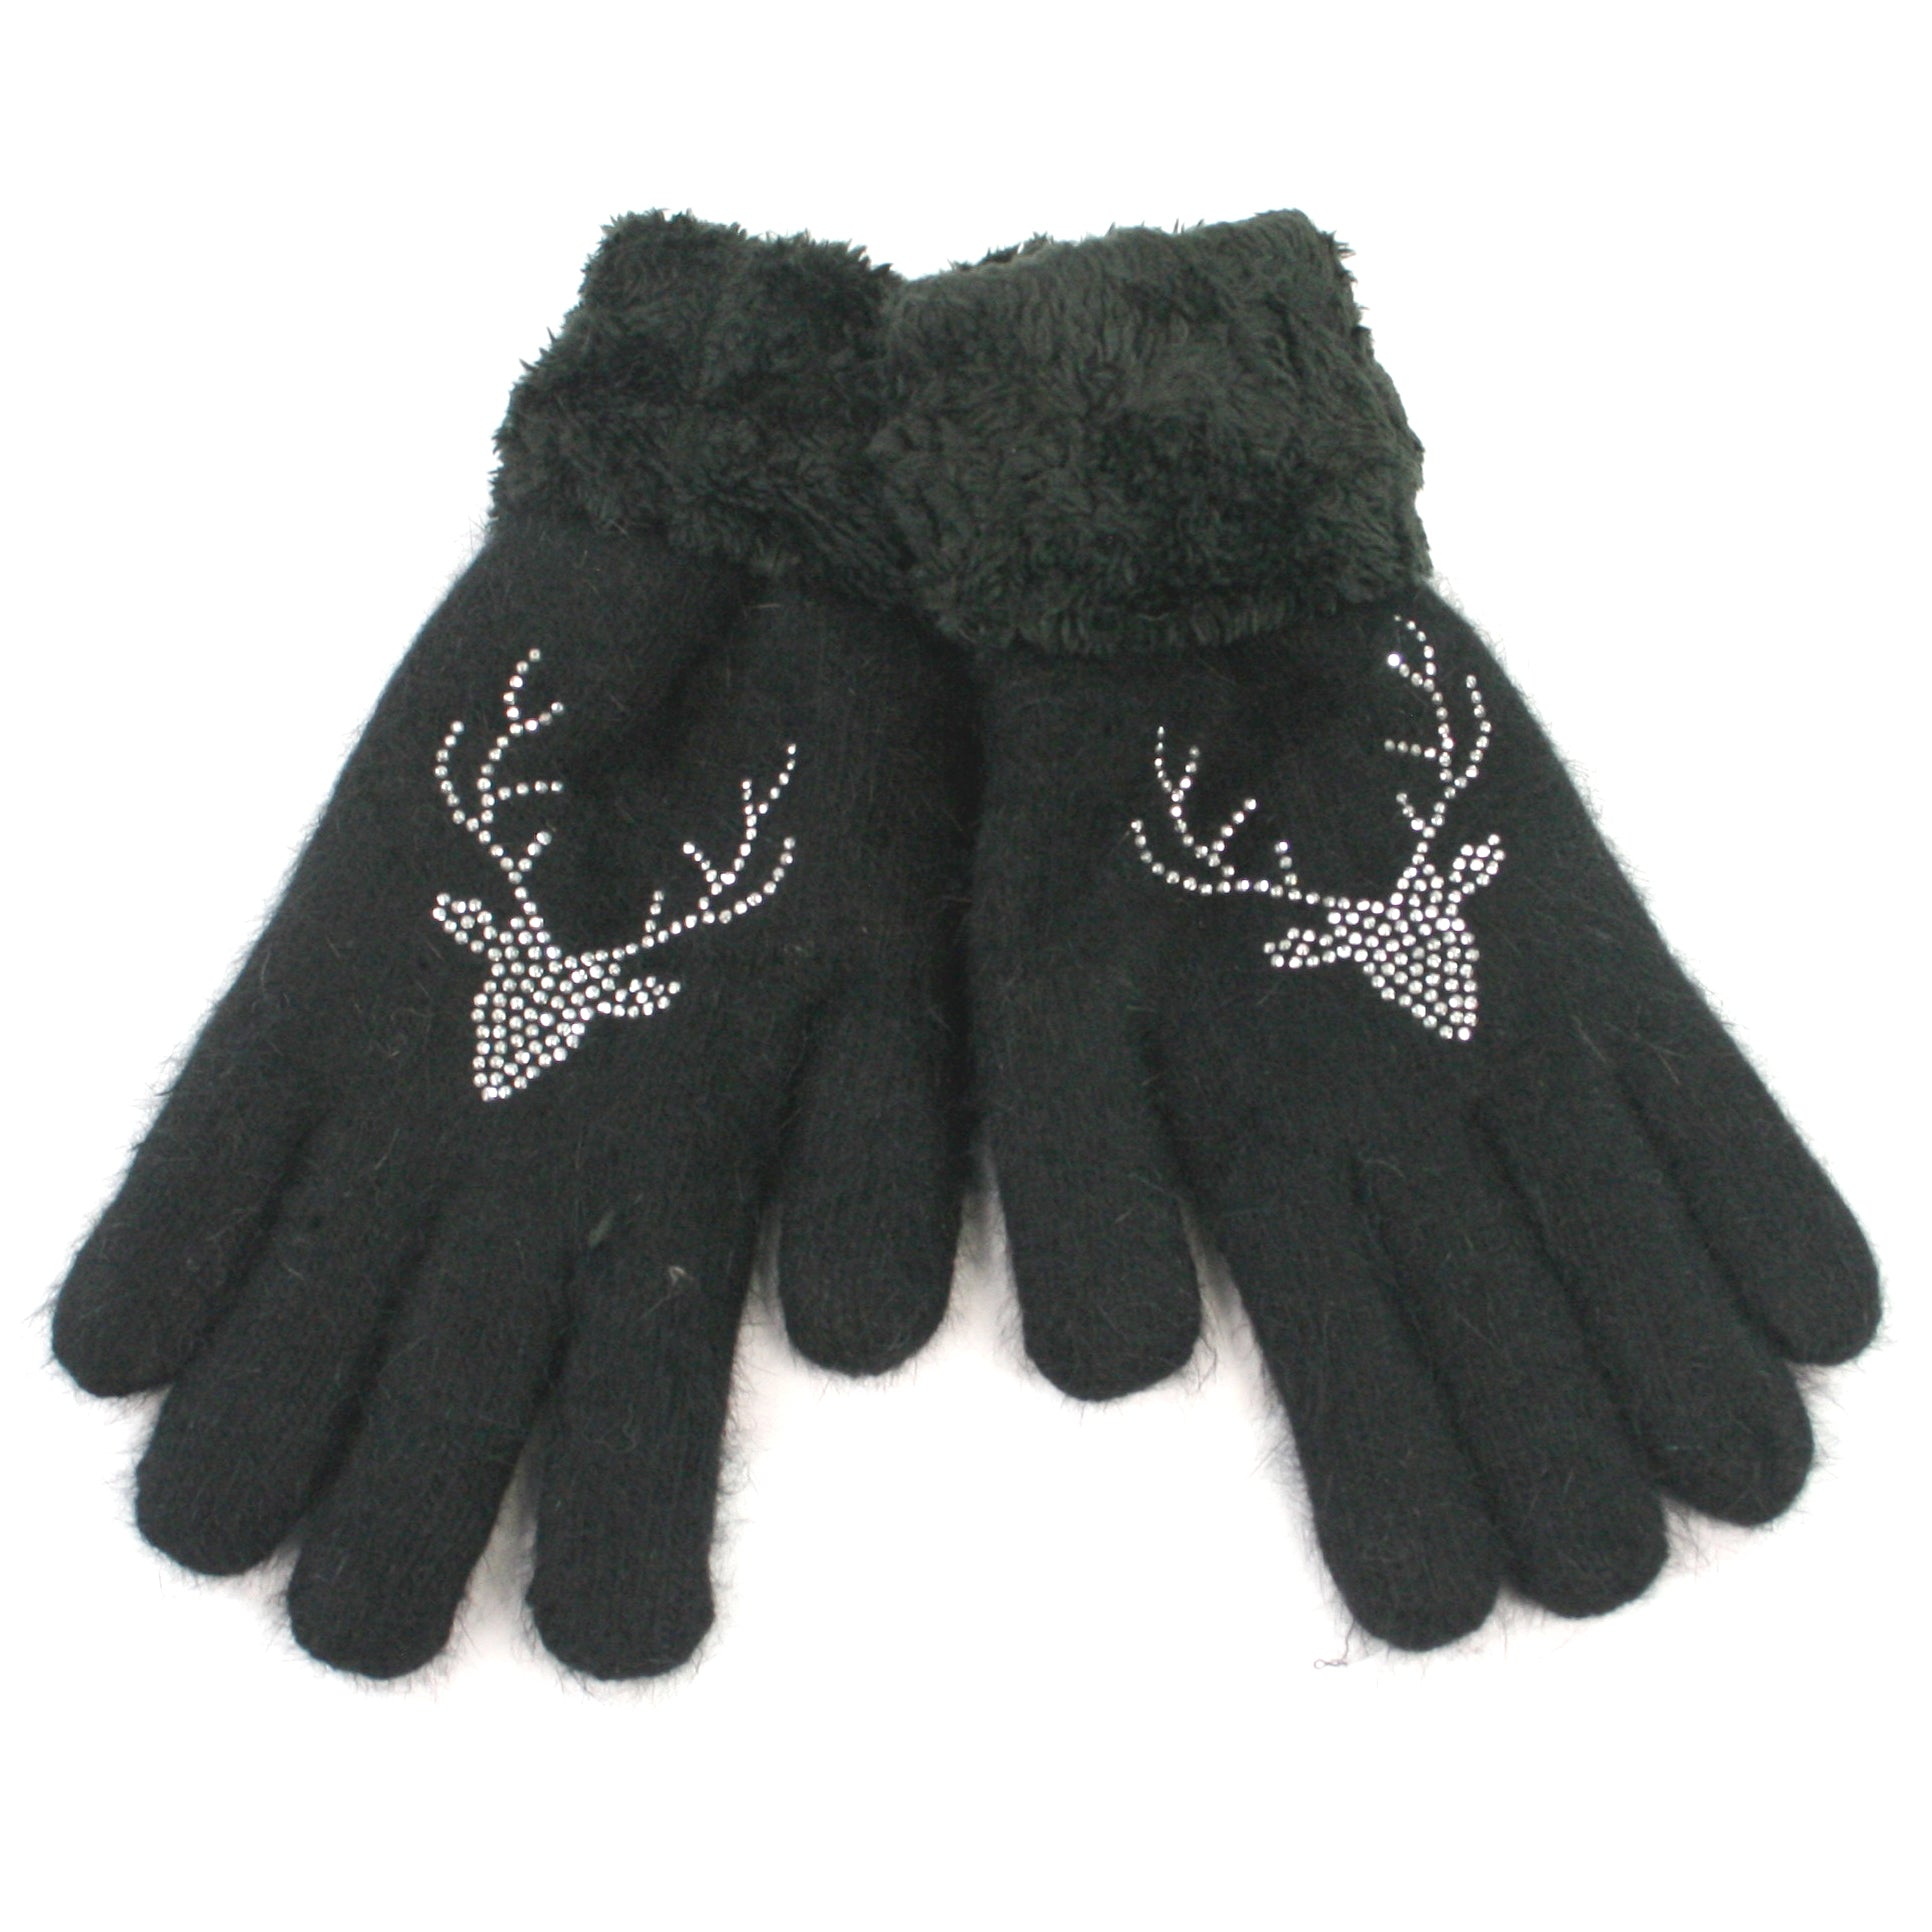 cosy stag gloves with toasty faux fur lining